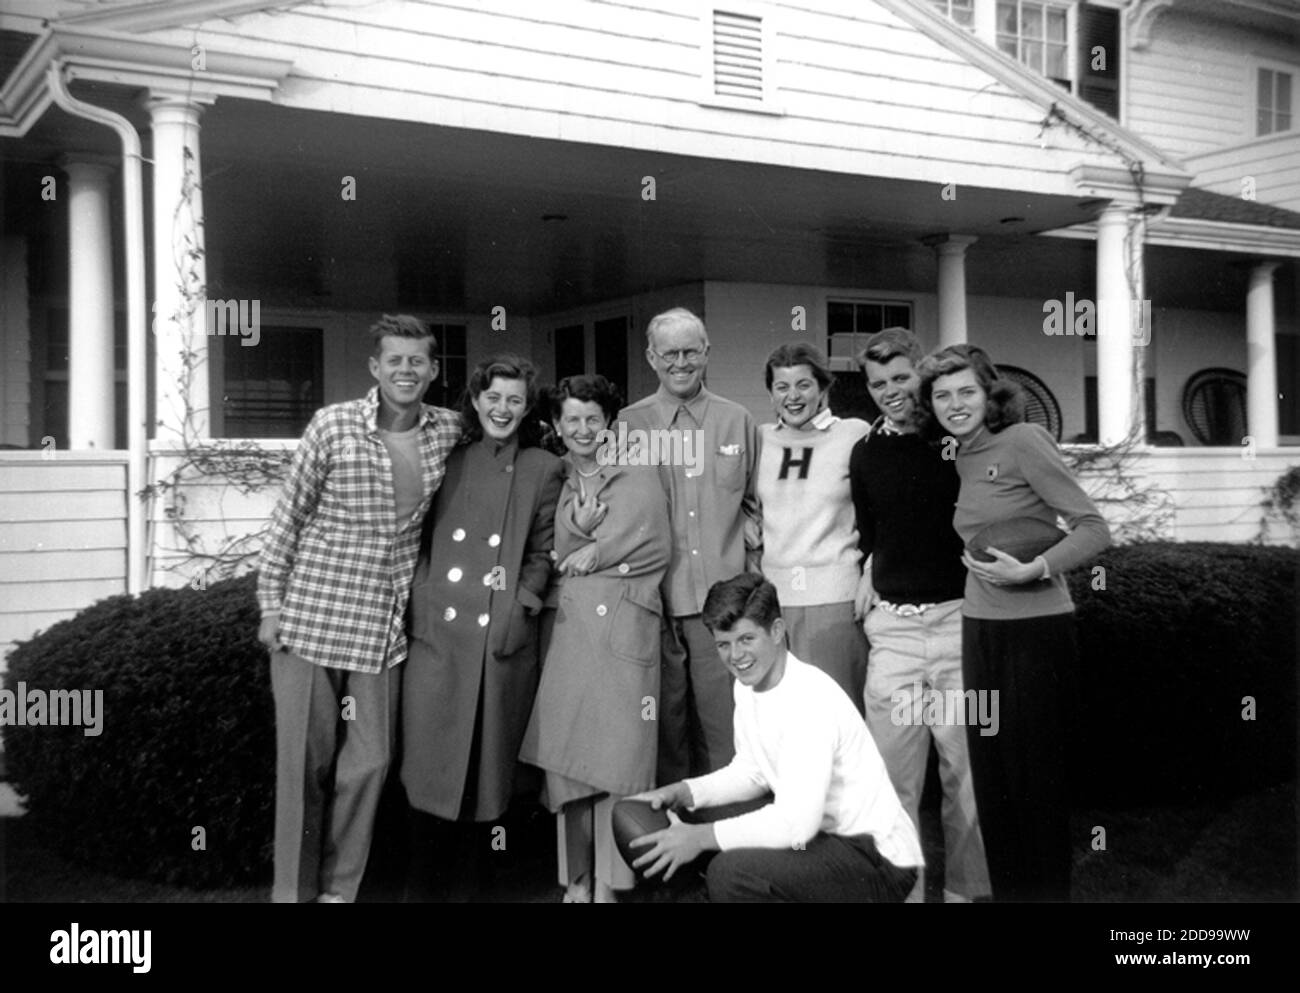 NO FILM, NO VIDEO, NO TV, NO DOCUMENTARY - The Kennedy Family in Hyannis Port, 1948. (L-R) John F. Kennedy, Jean Kennedy, Rose Kennedy, Joseph P. Kennedy Sr., Patricia Kennedy, Robert F. Kennedy, Eunice Kennedy, and in foreground, Edward M. Kennedy. Photo by John F. Kennedy Presidential Library and Museum/MCT/ABACAPRESS.COM Stock Photo